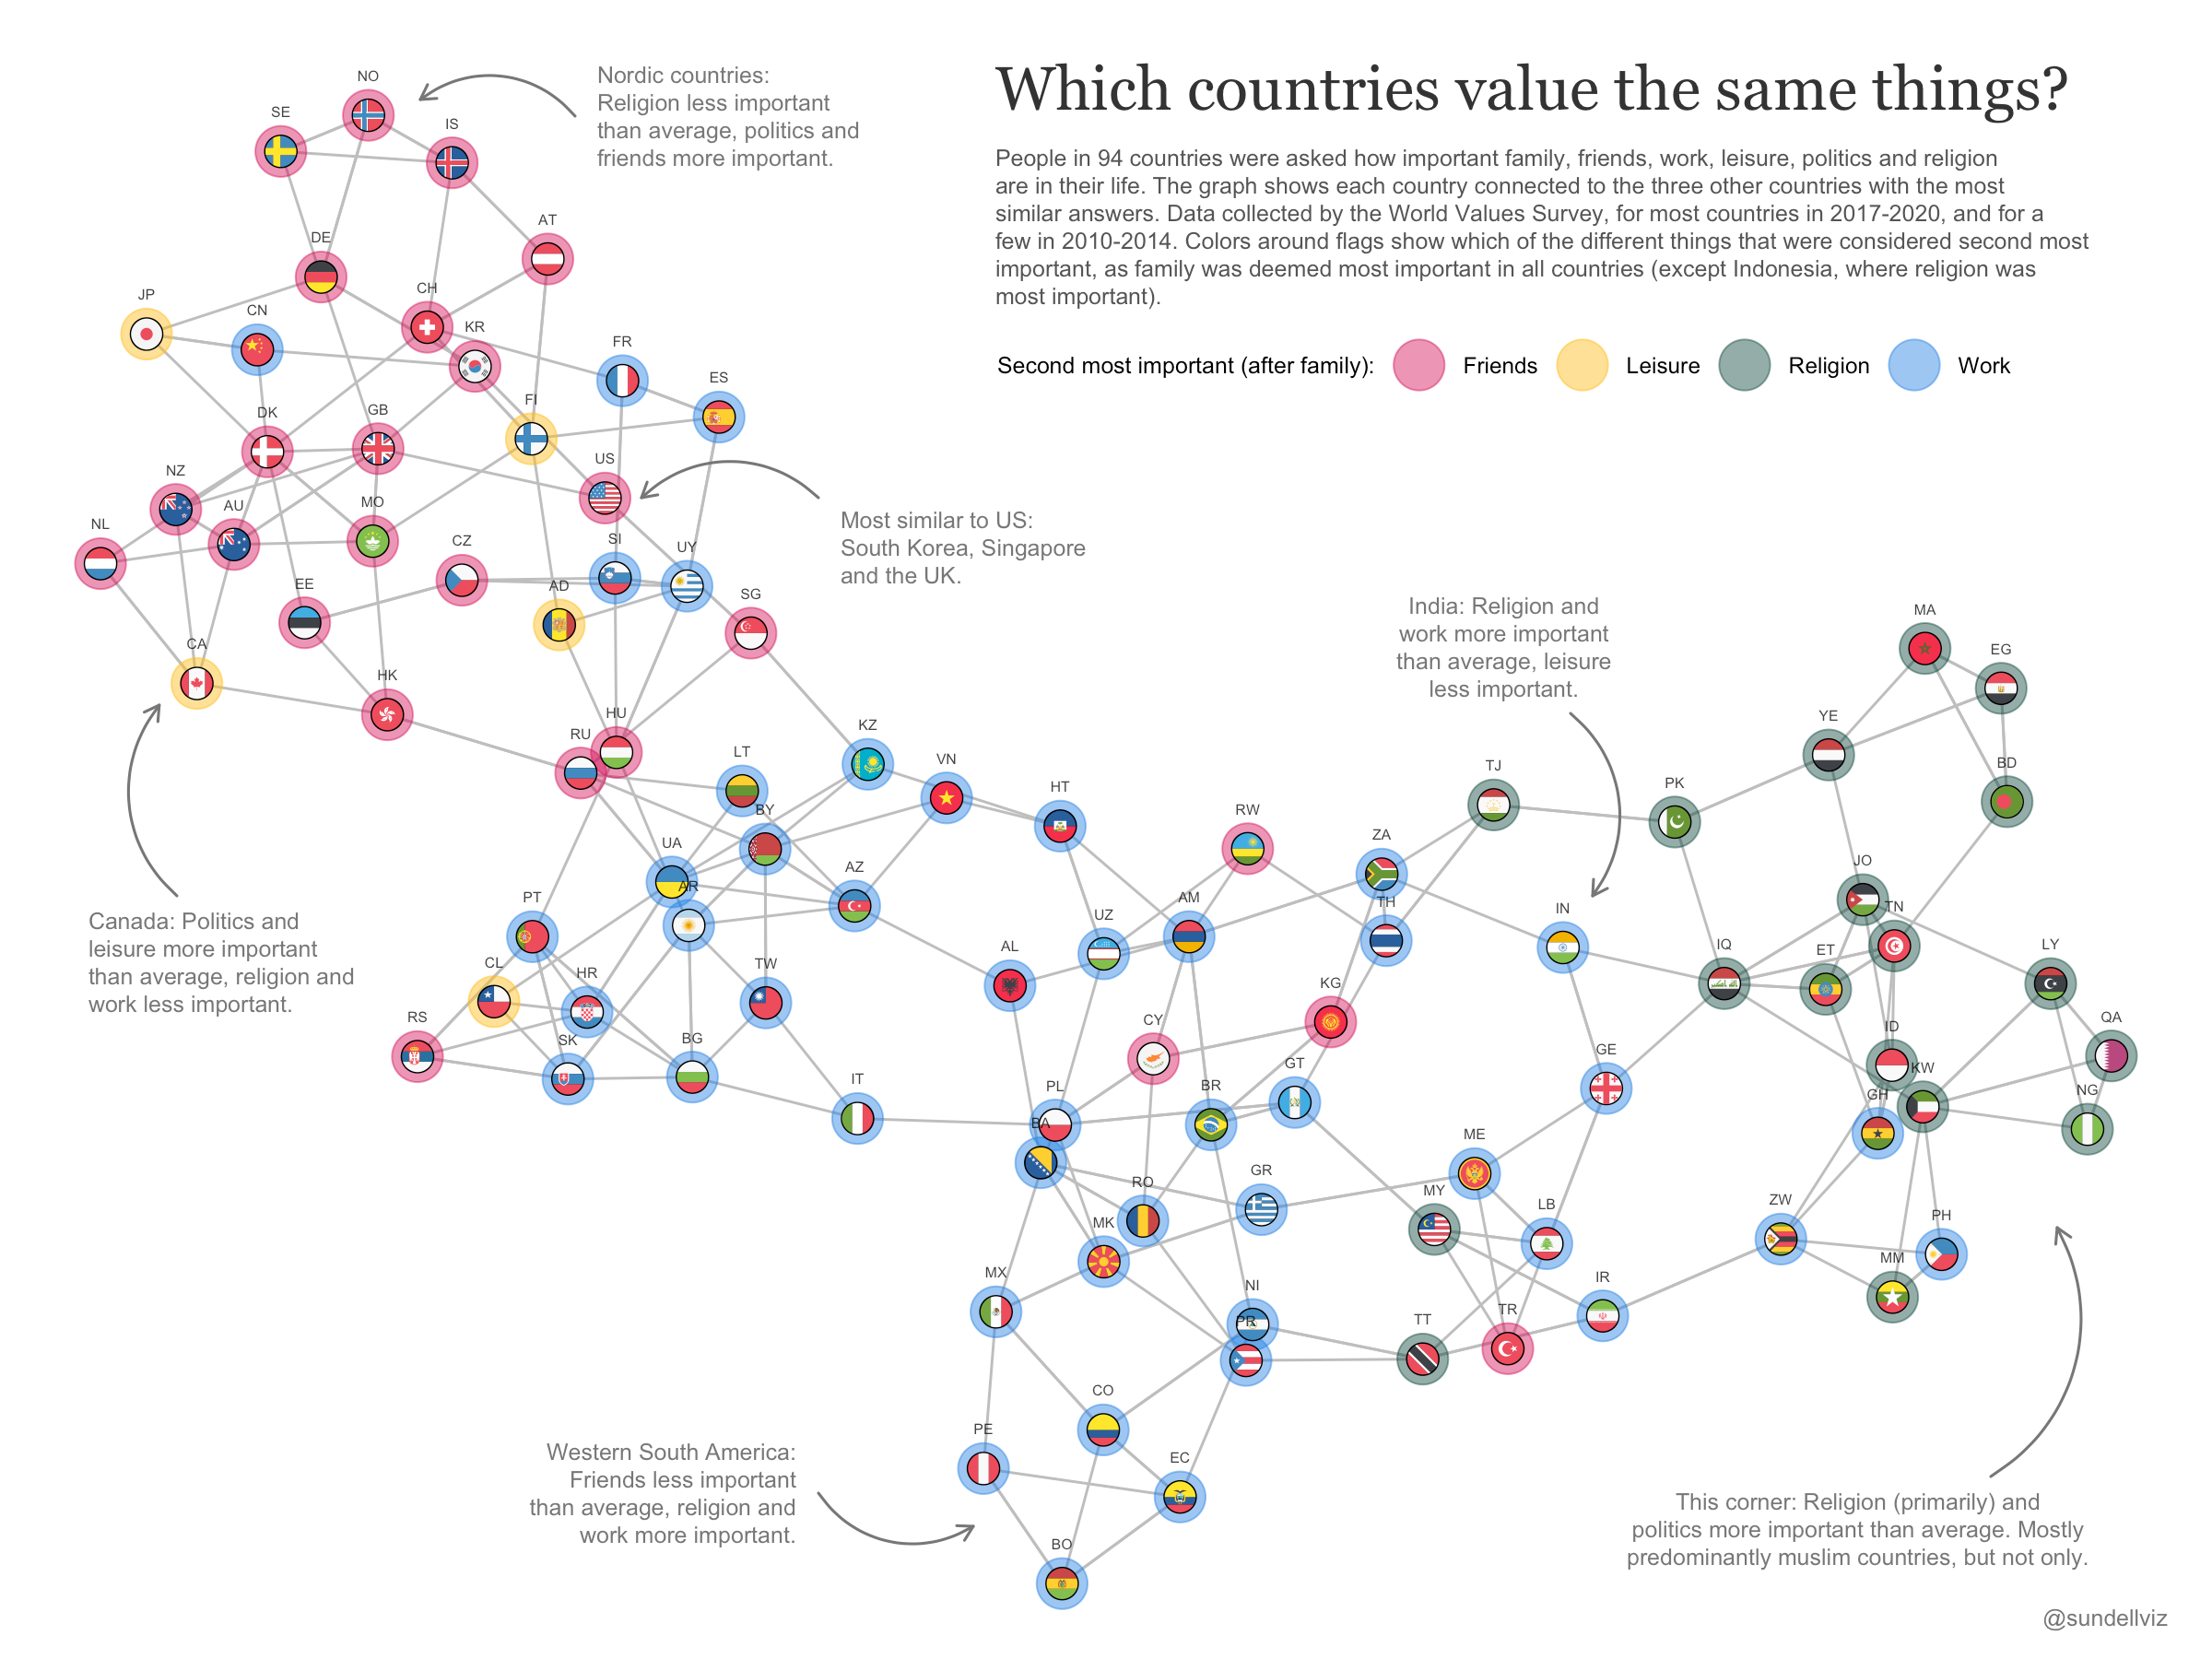 Which Countries Have the Most Similar Values?